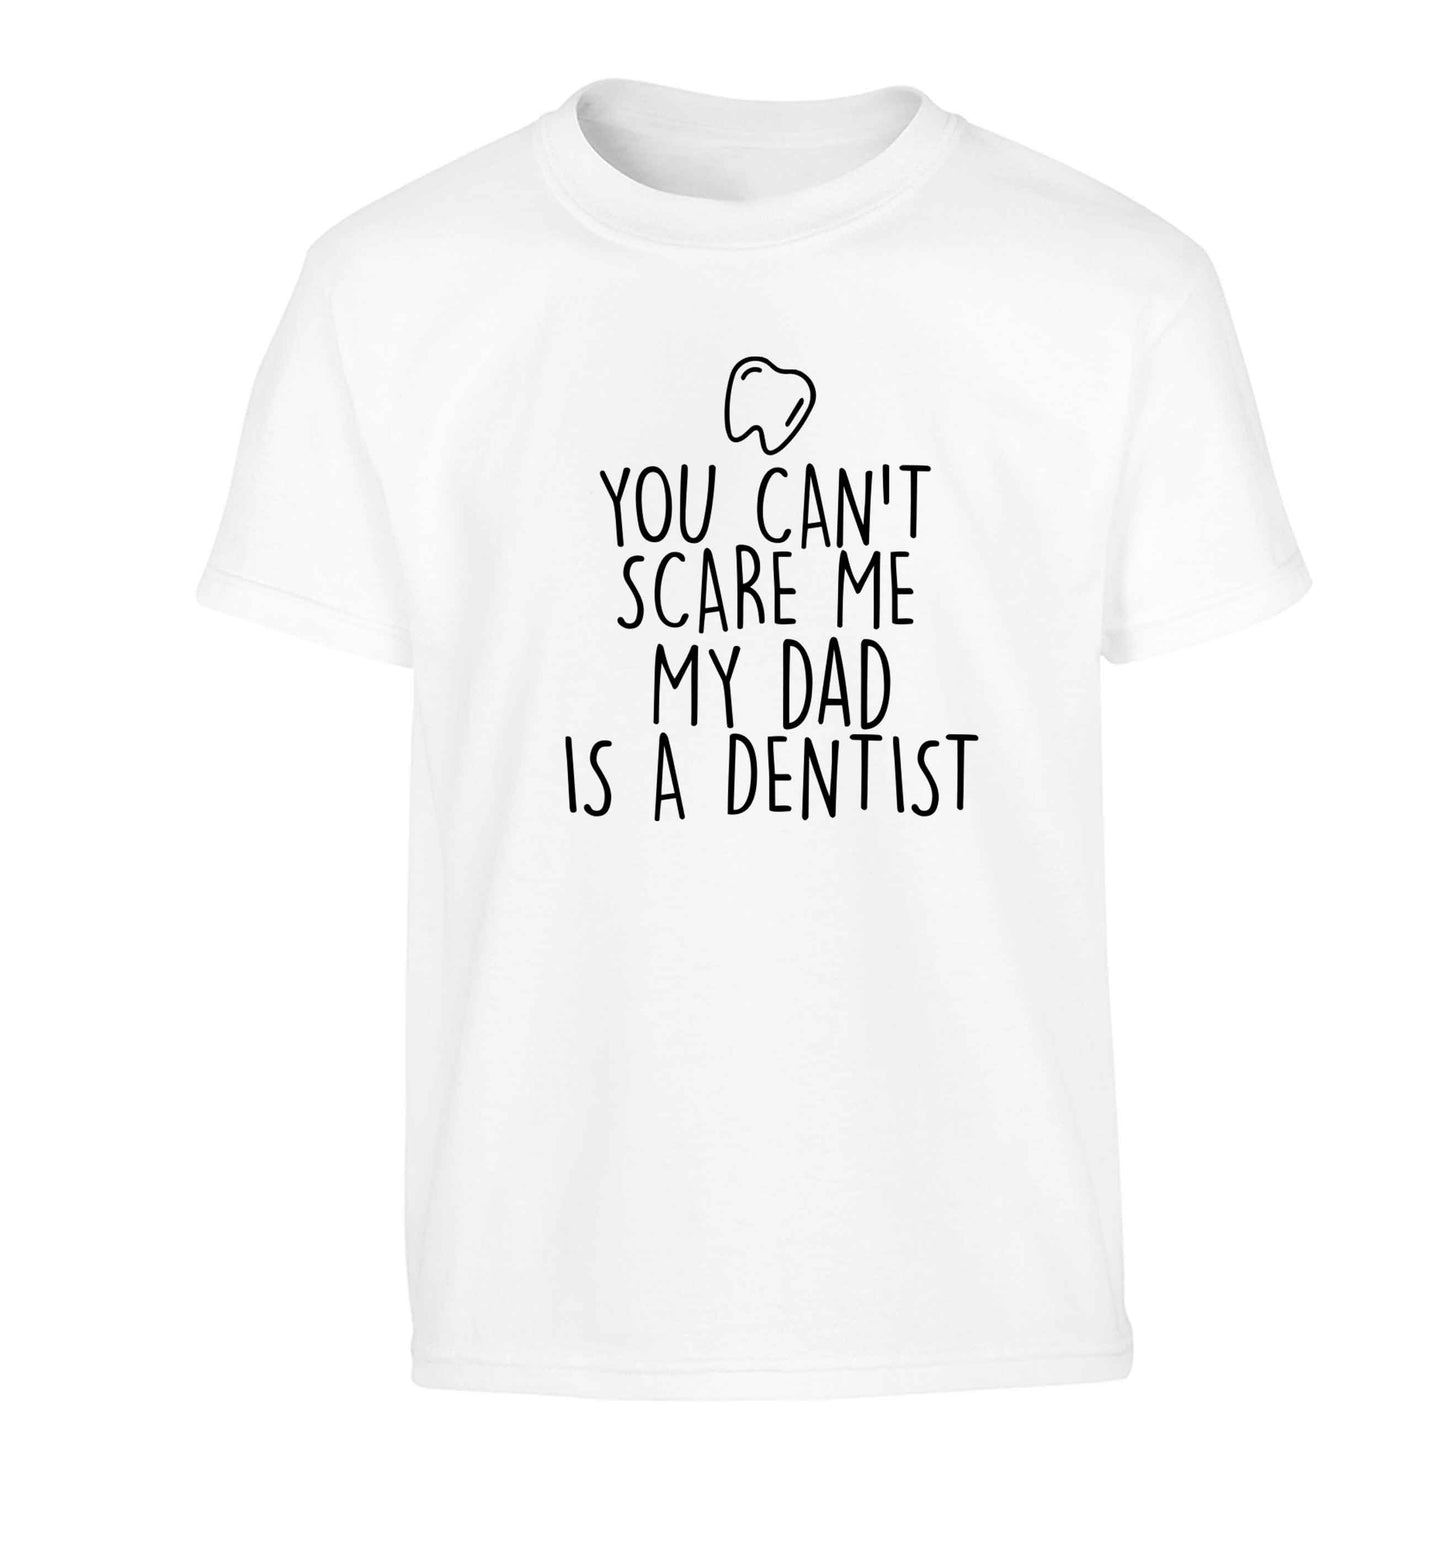 You can't scare me my dad is a dentist Children's white Tshirt 12-13 Years